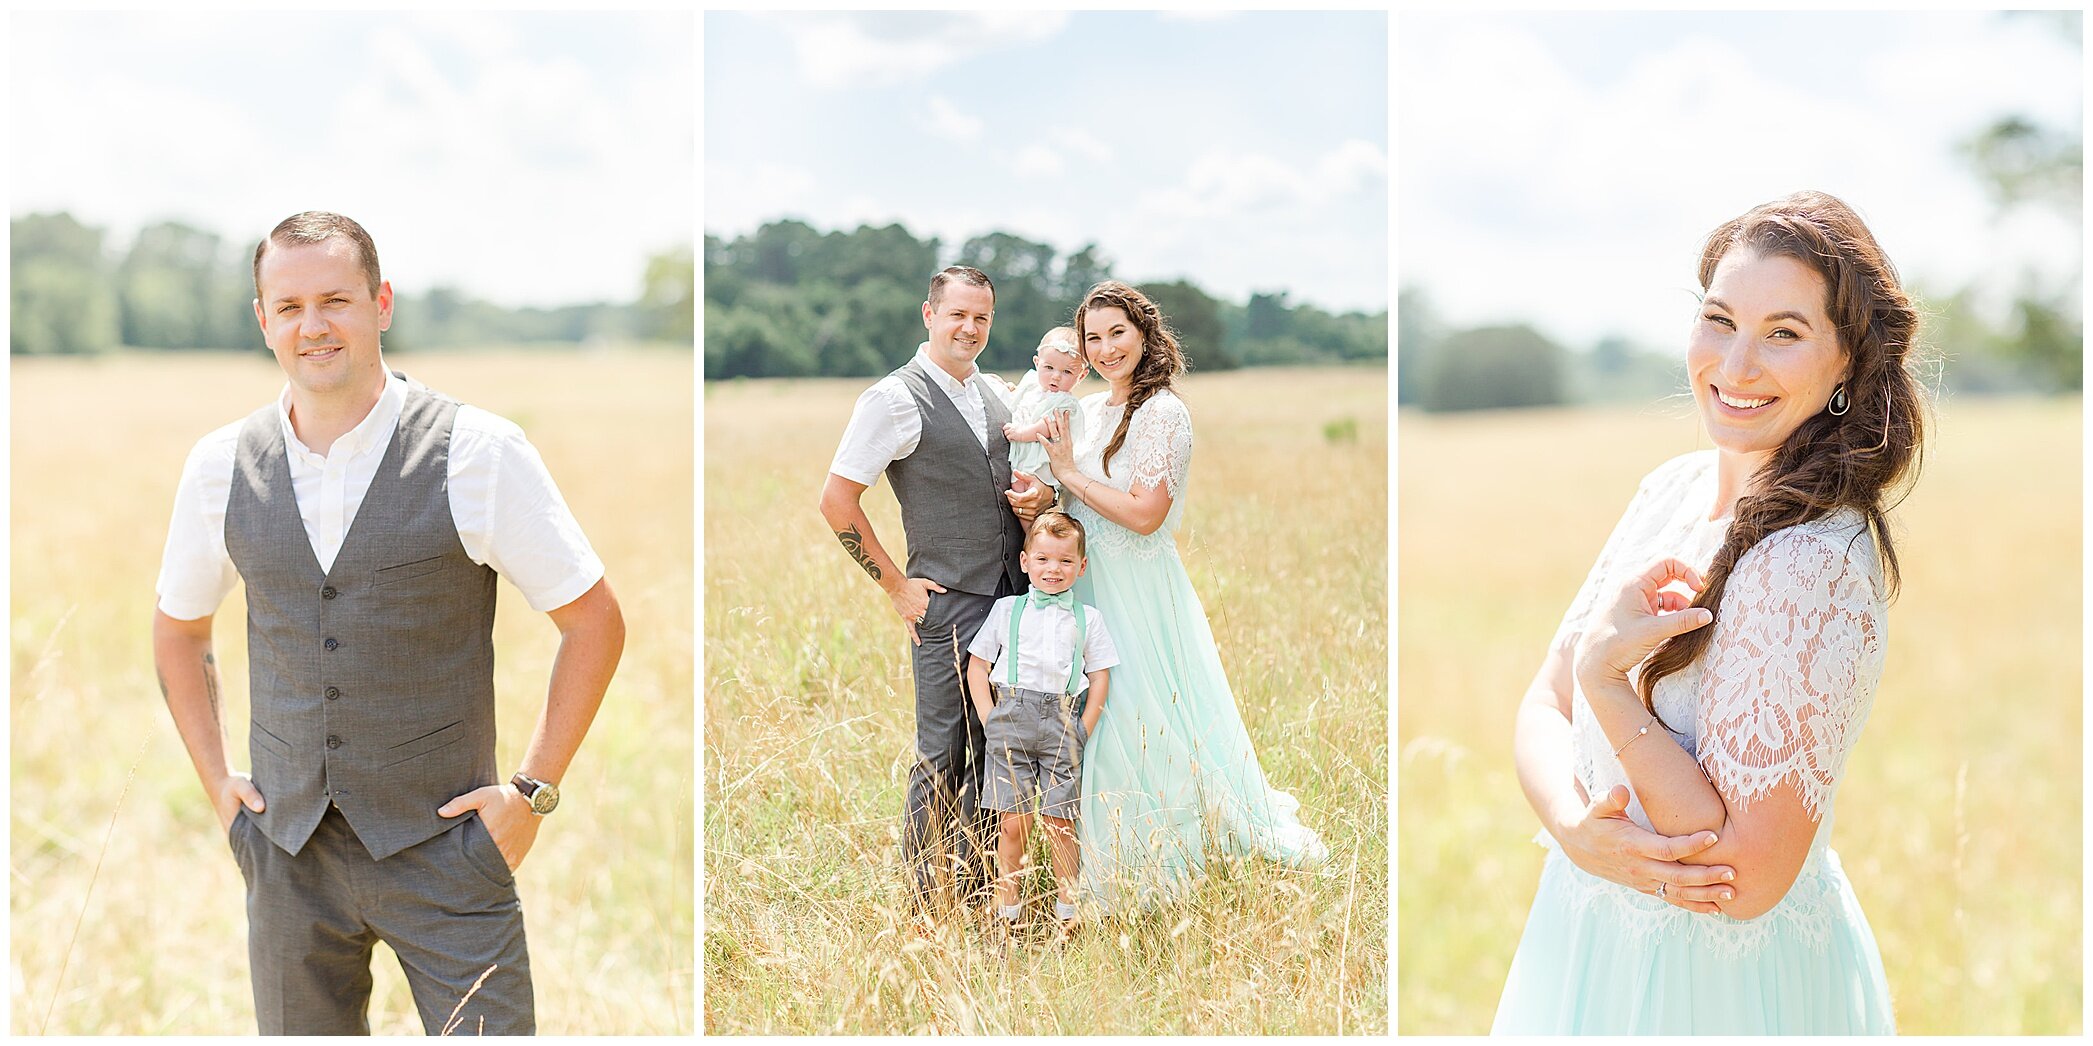  Brooke did these for us too, and did such an amazing job capturing our family!  